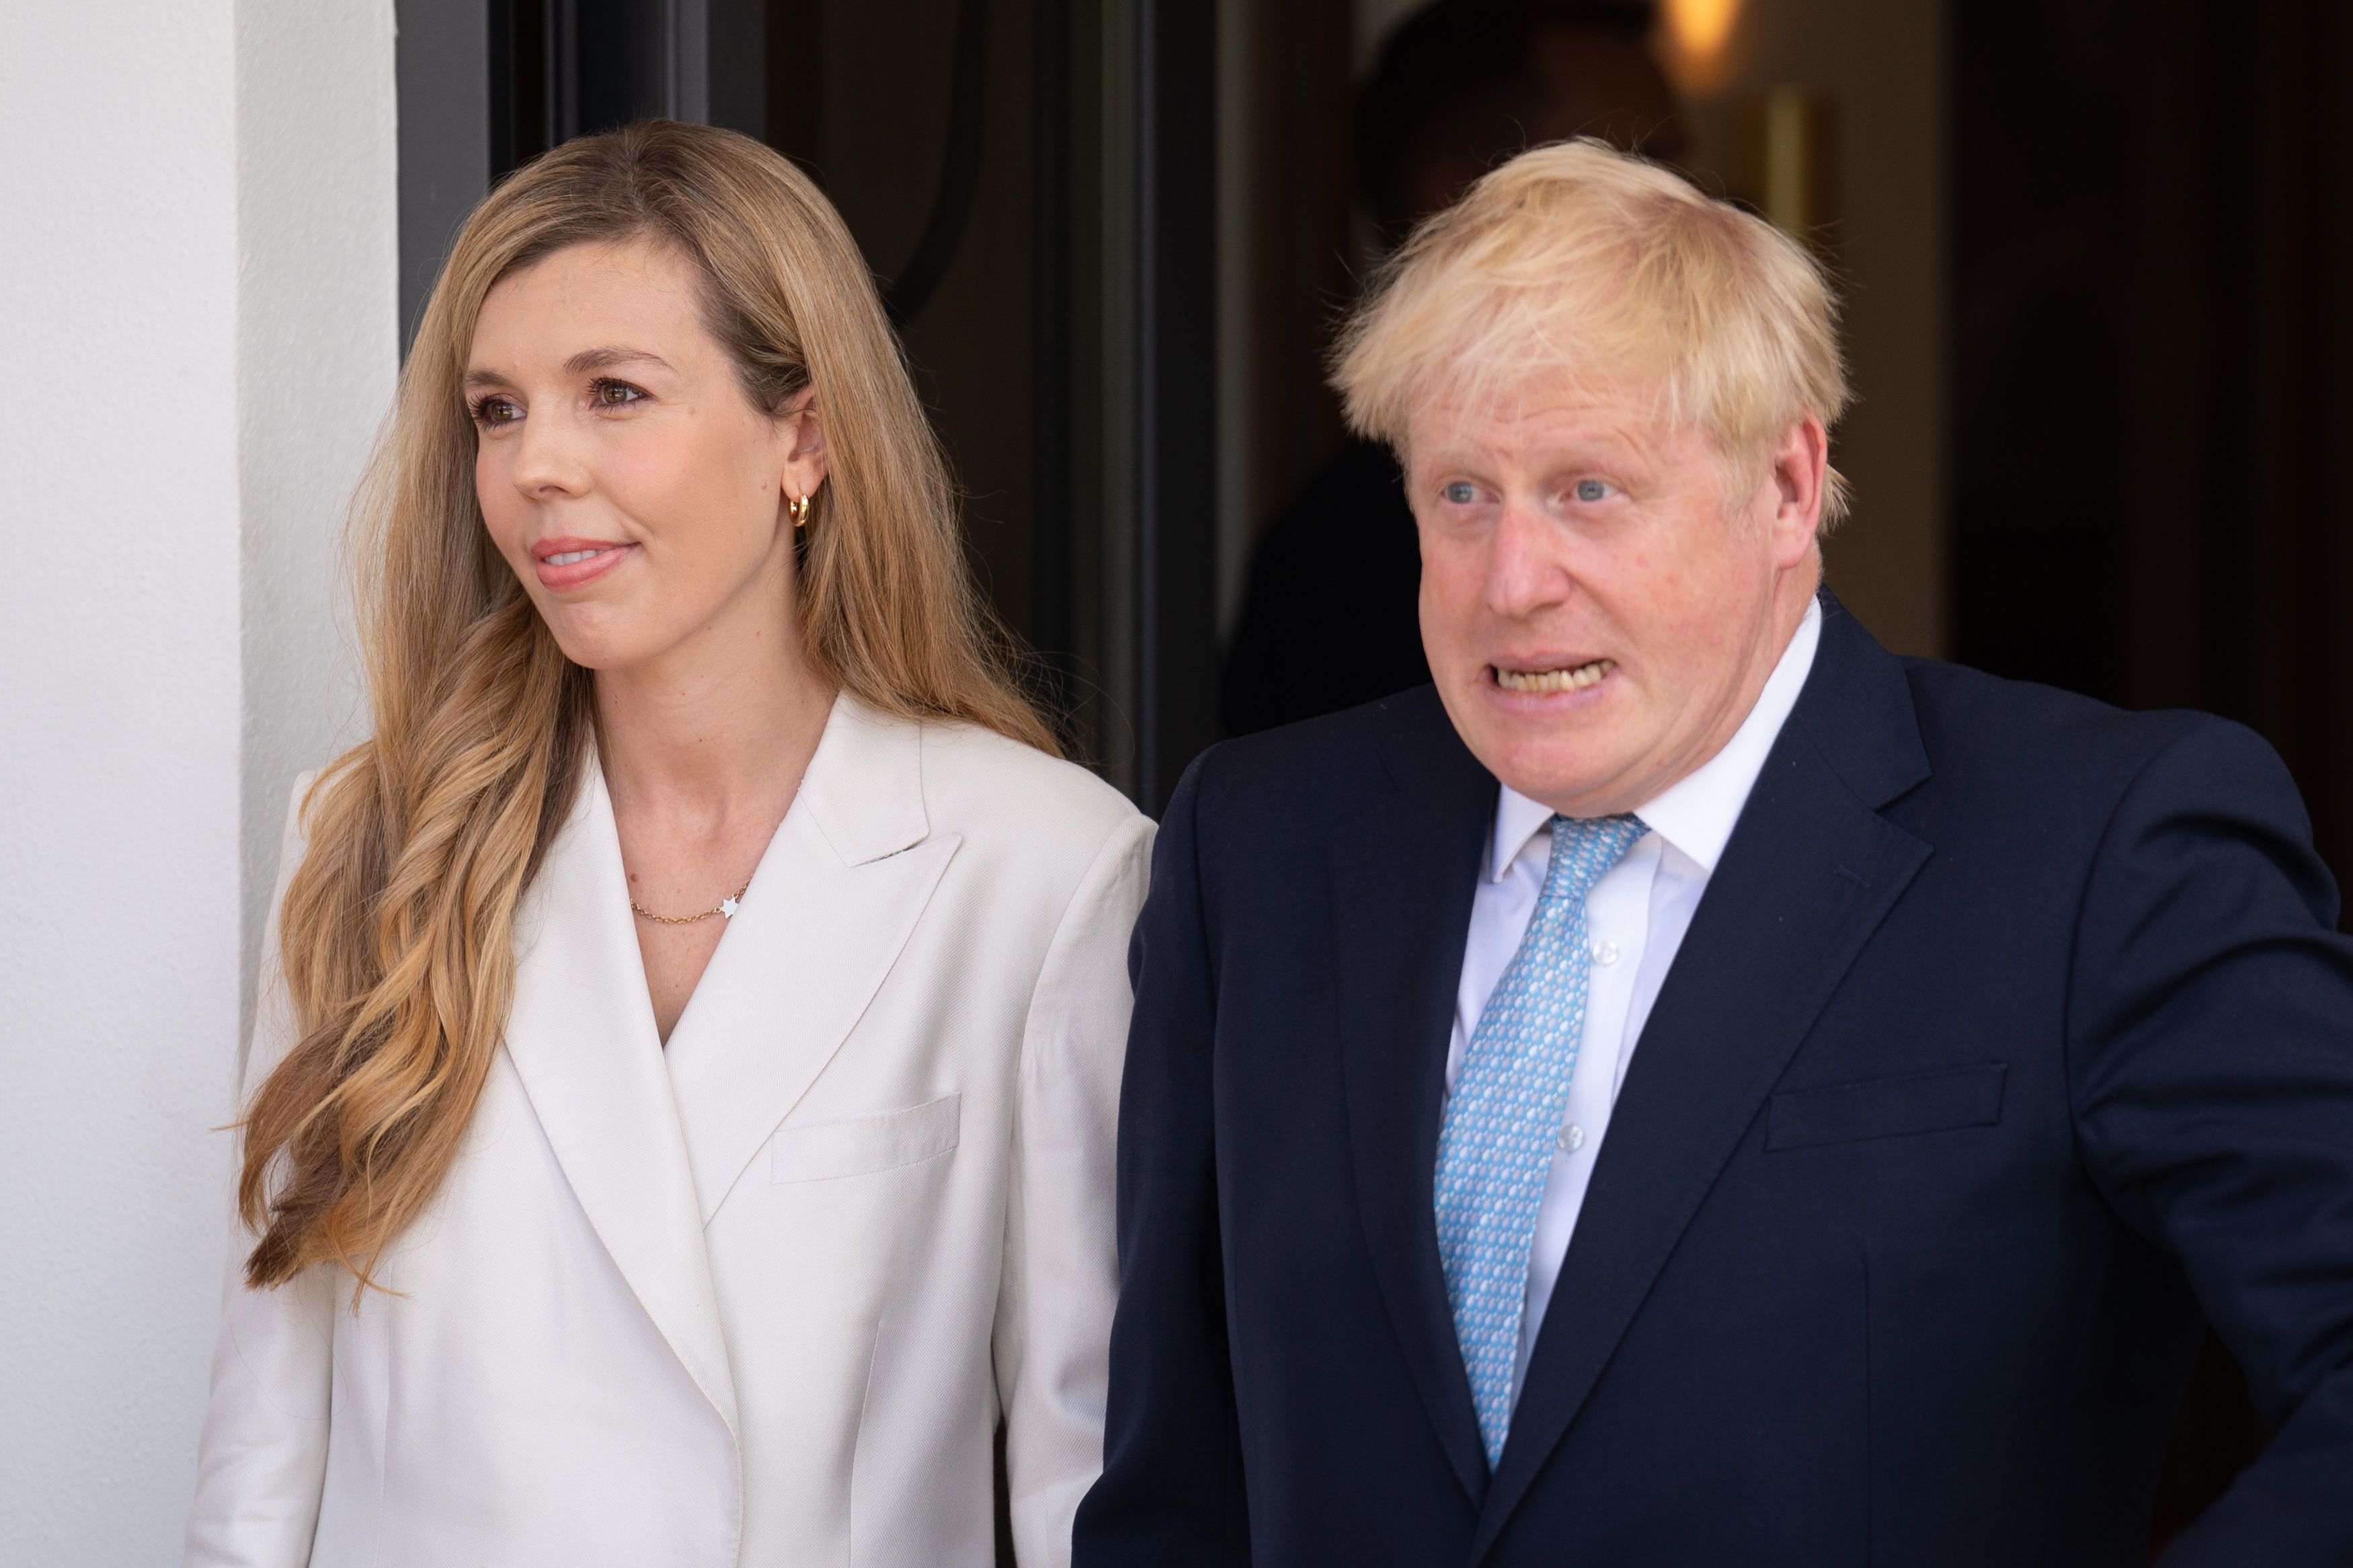 Boris Johnson and Carrie Symonds a relationship timeline